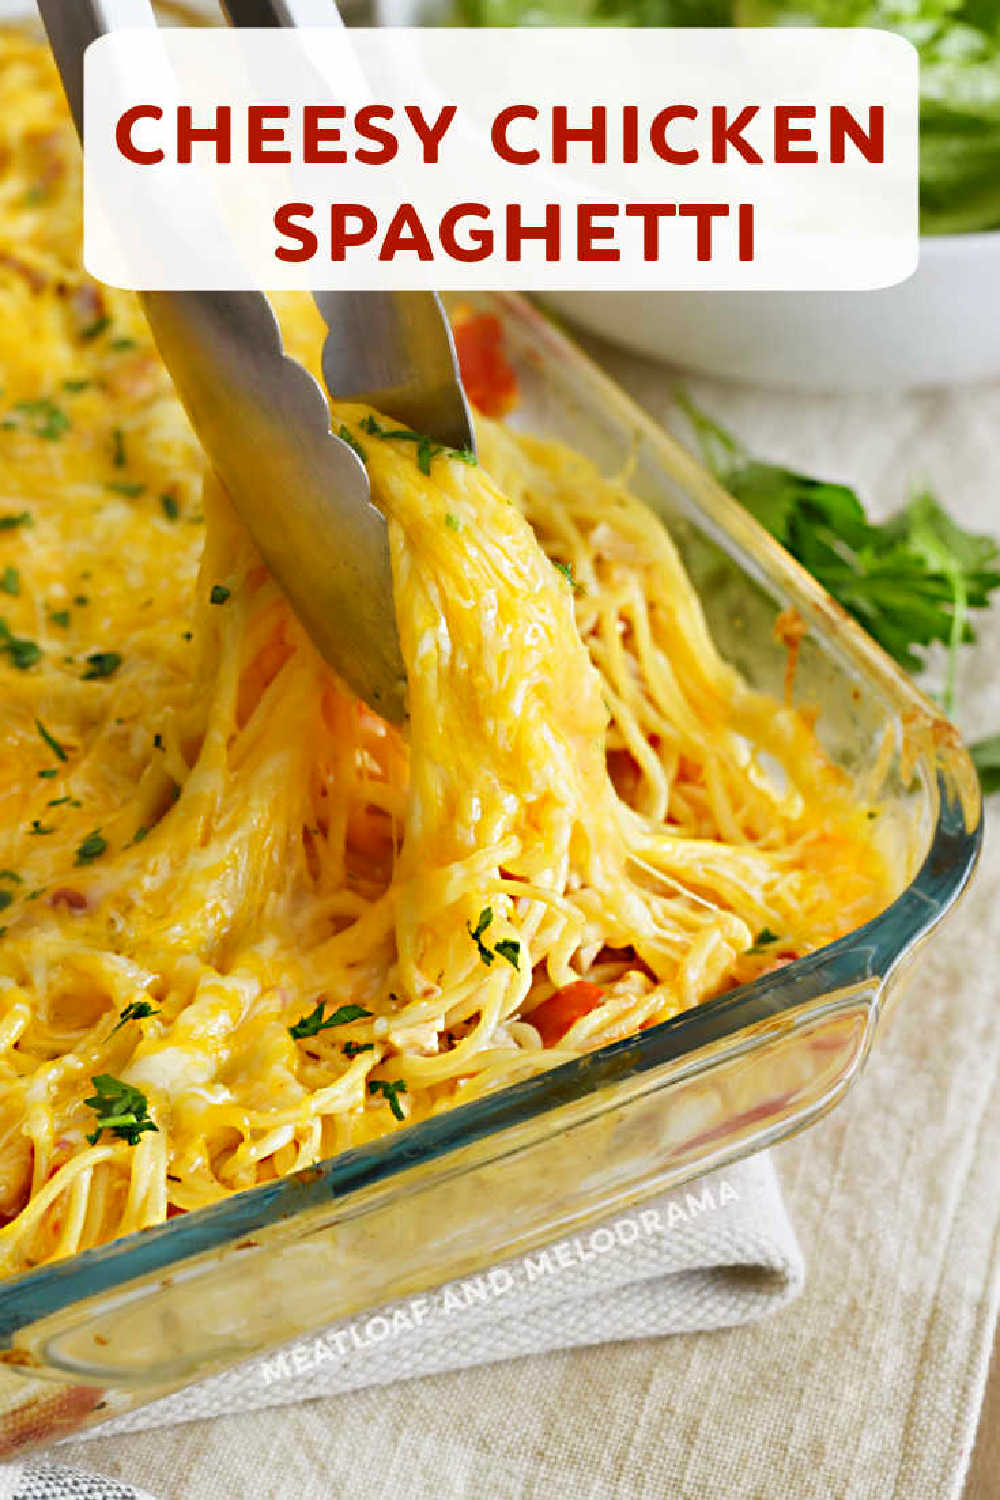 This Cheesy Chicken Spaghetti recipe made with leftover chicken, tender pasta, diced tomatoes and cheese in a creamy sauce is a family favorite dinner. Your whole family will love this cheesy pasta bake. It's the ultimate comfort food! via @meamel